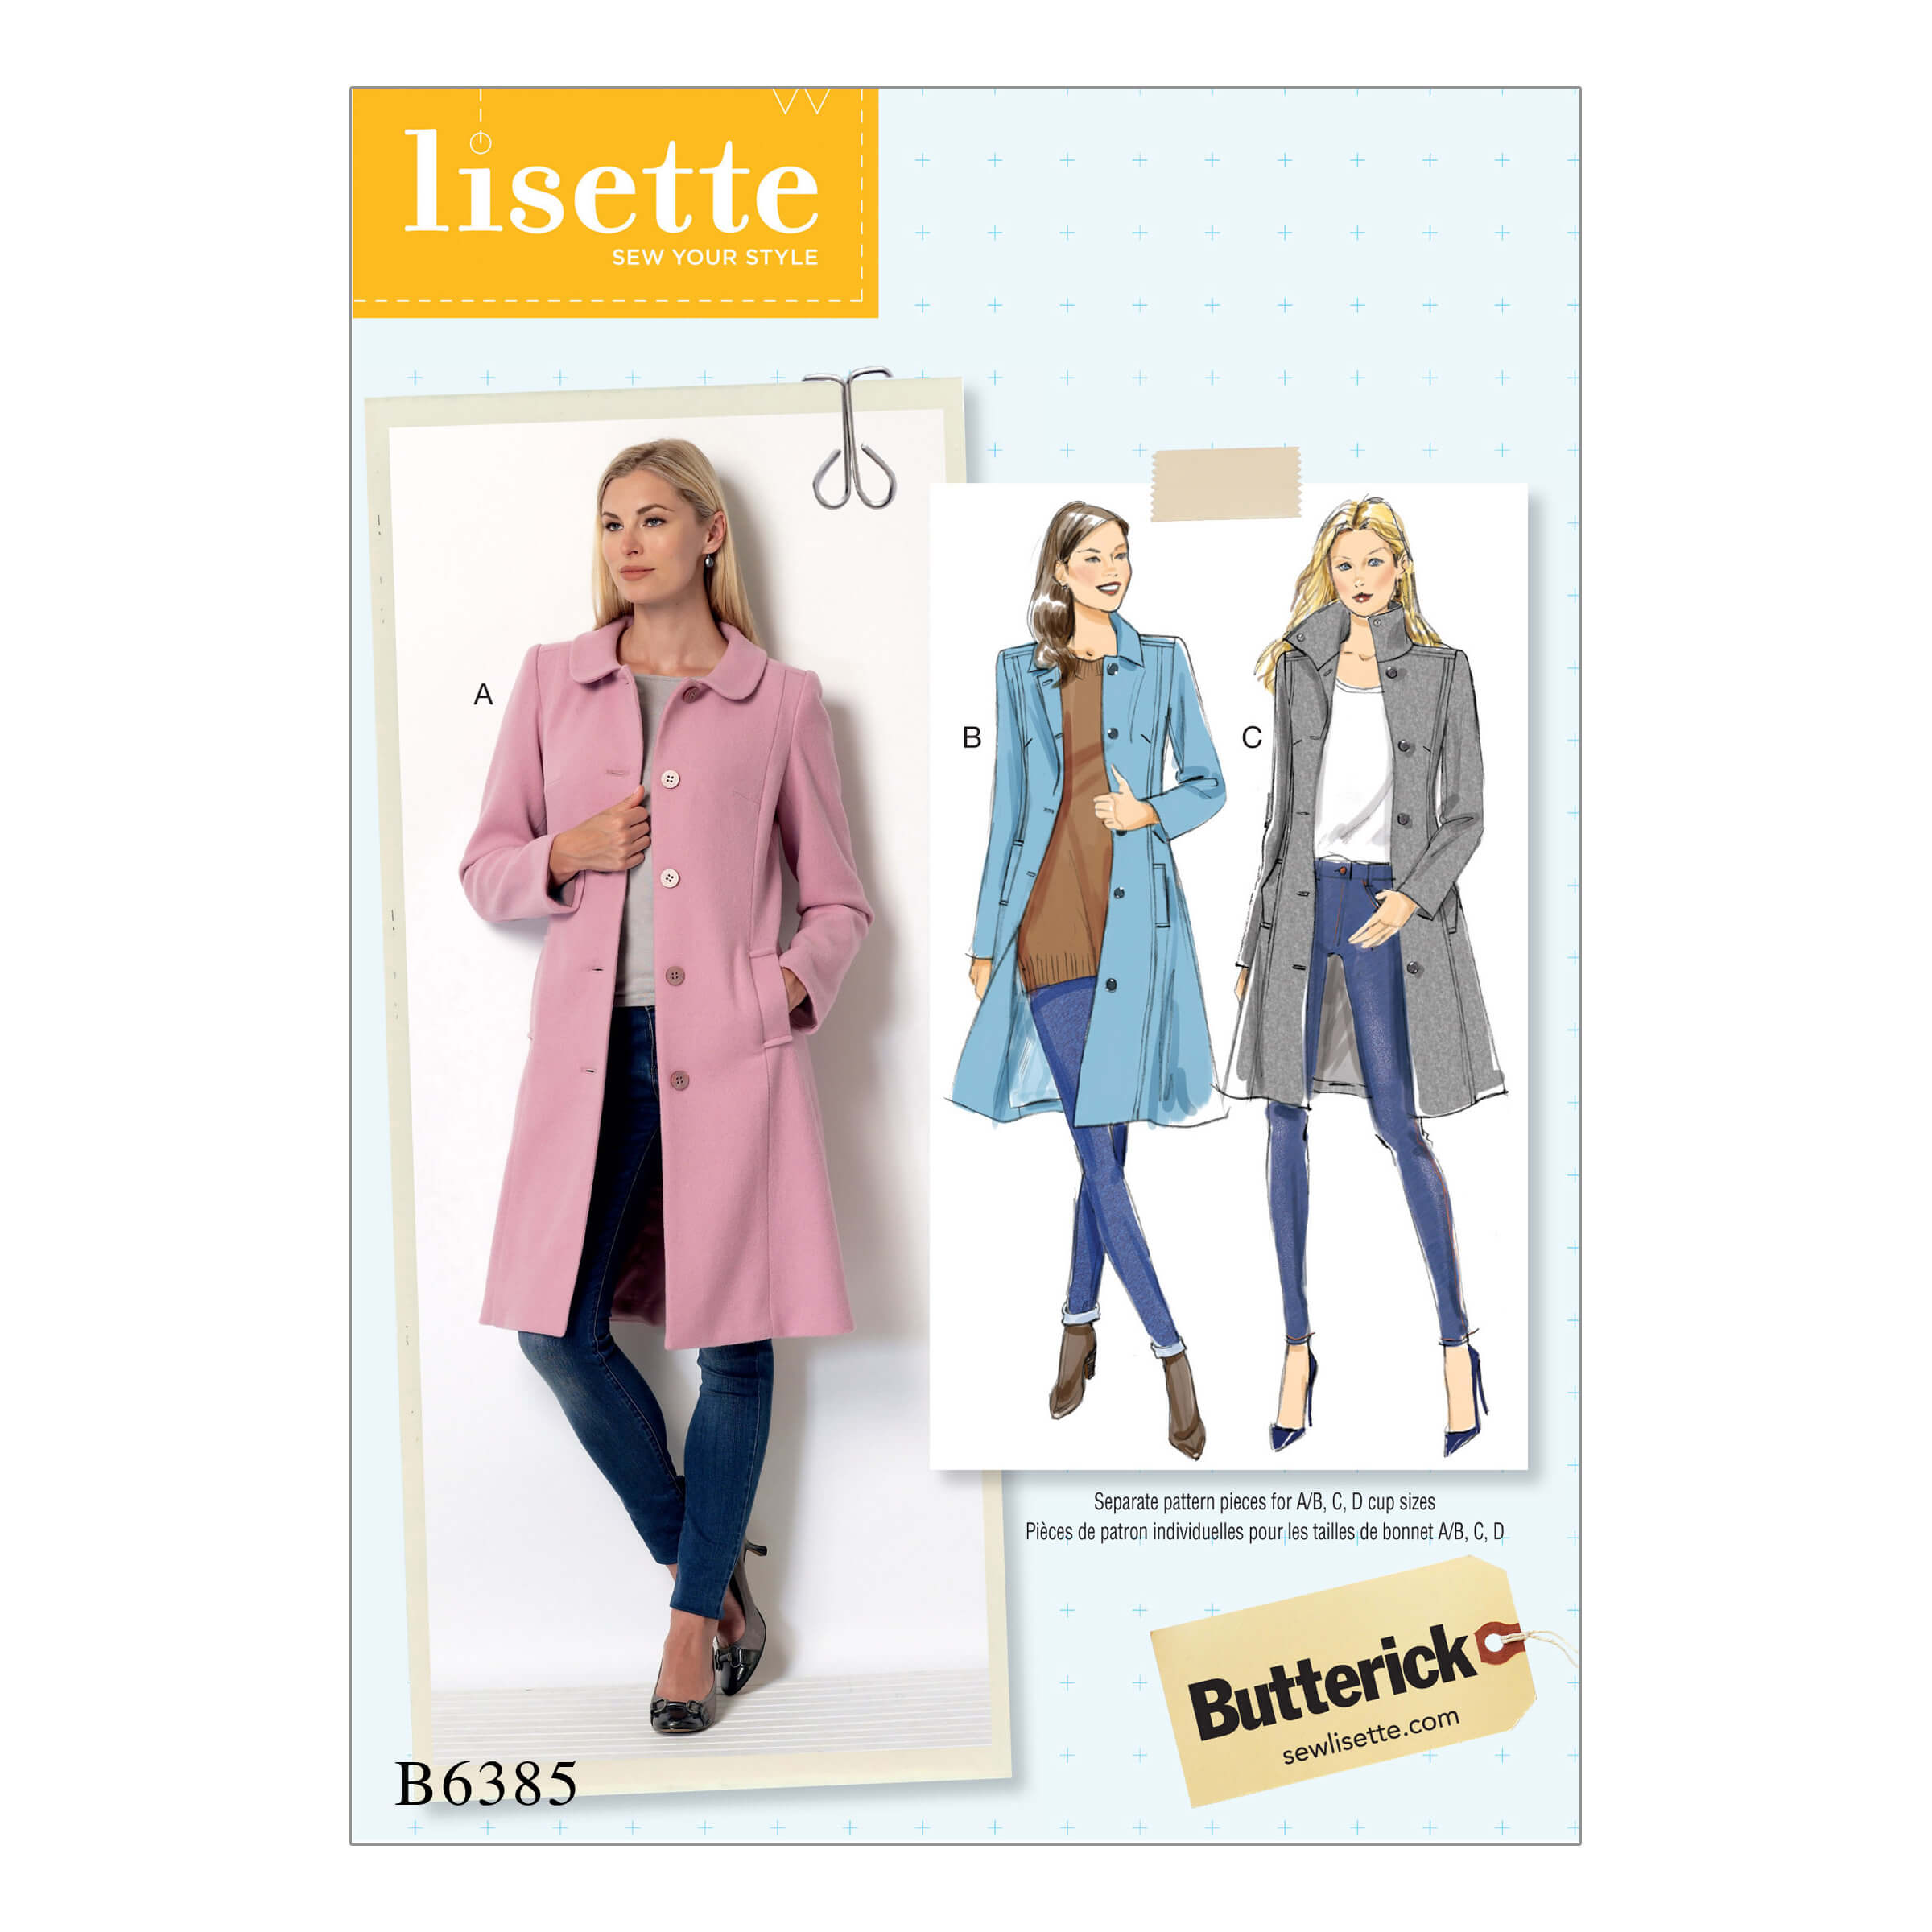 Butterick Sewing Pattern B6385 Misses' Lisette Funnel-Neck, Peter Pan or Pointed Collar Coats